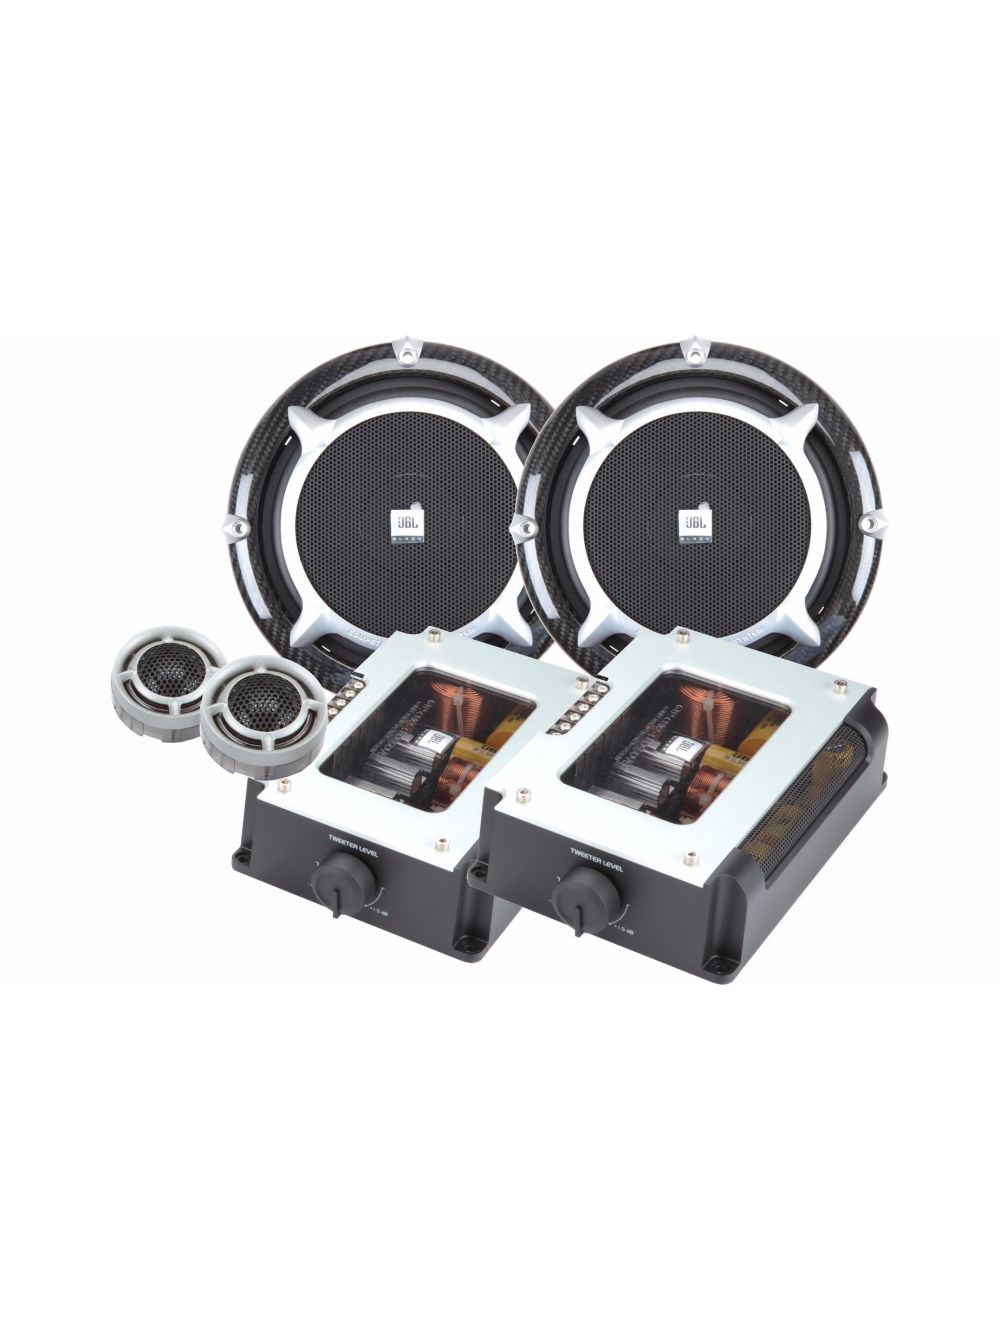 JBL 670GTi 6-1/2 Two-way Car Audio Component System with Crossover